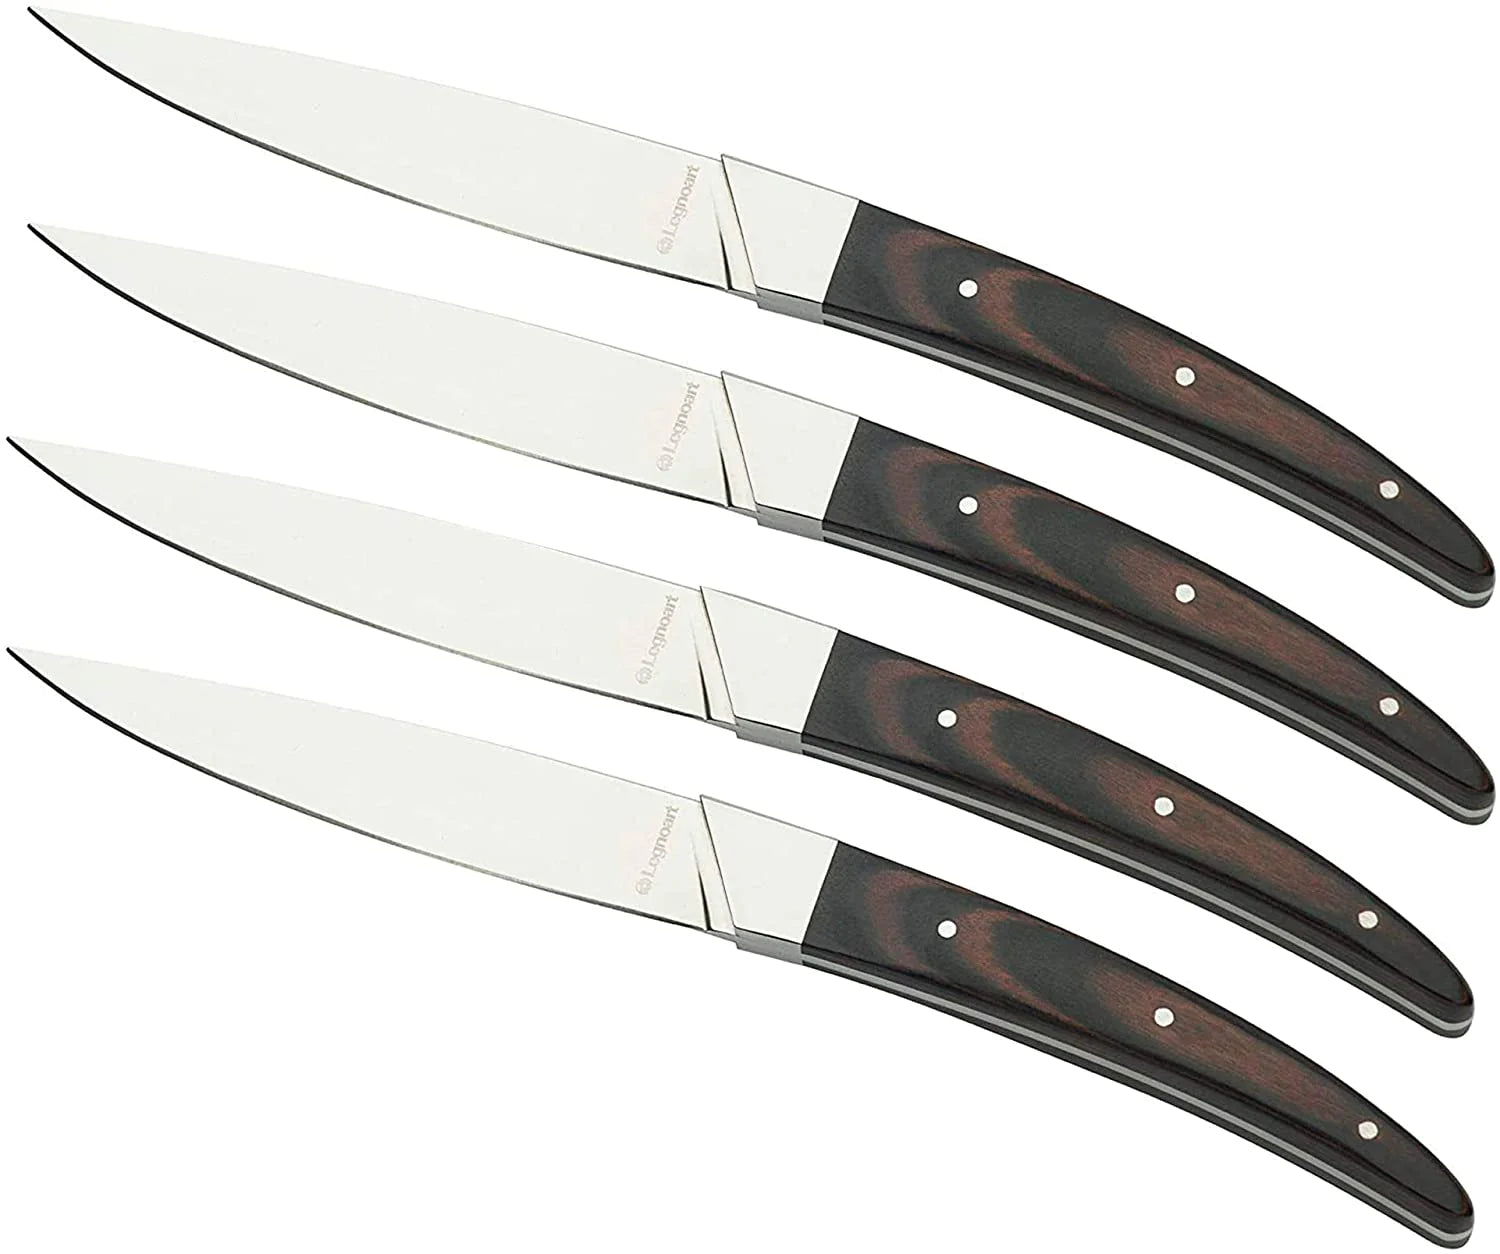 Portehouse 4-piece Steak Knife Set with Chocolate Wood Handle SK-7A